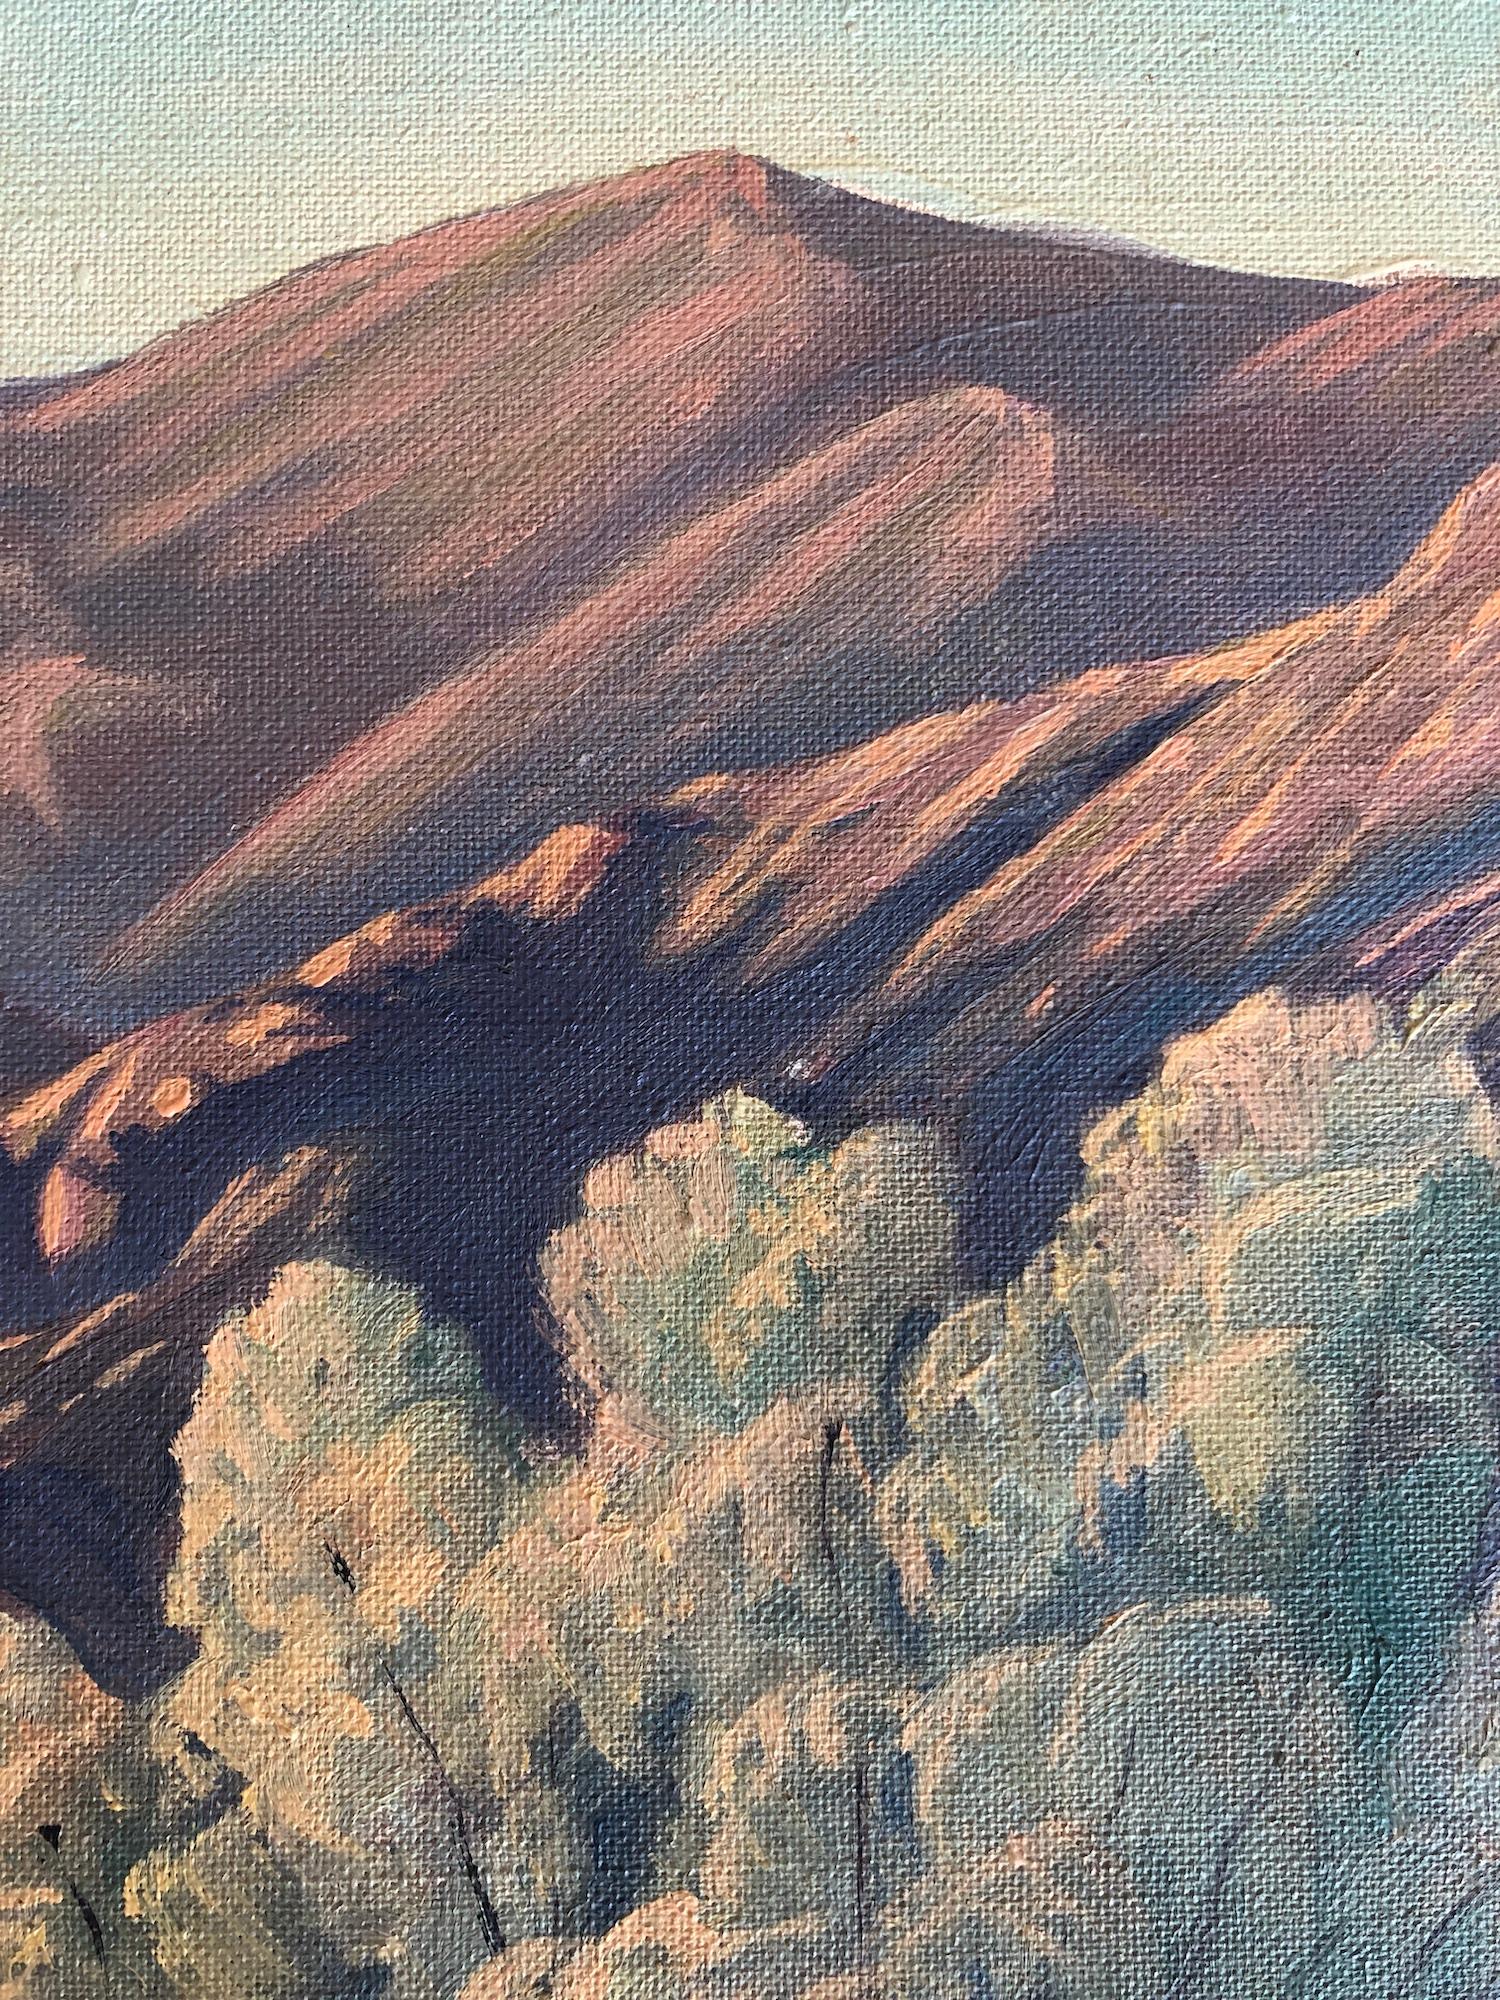 Landscape near Palmsprings - Naturalistic Painting by Bill Hager